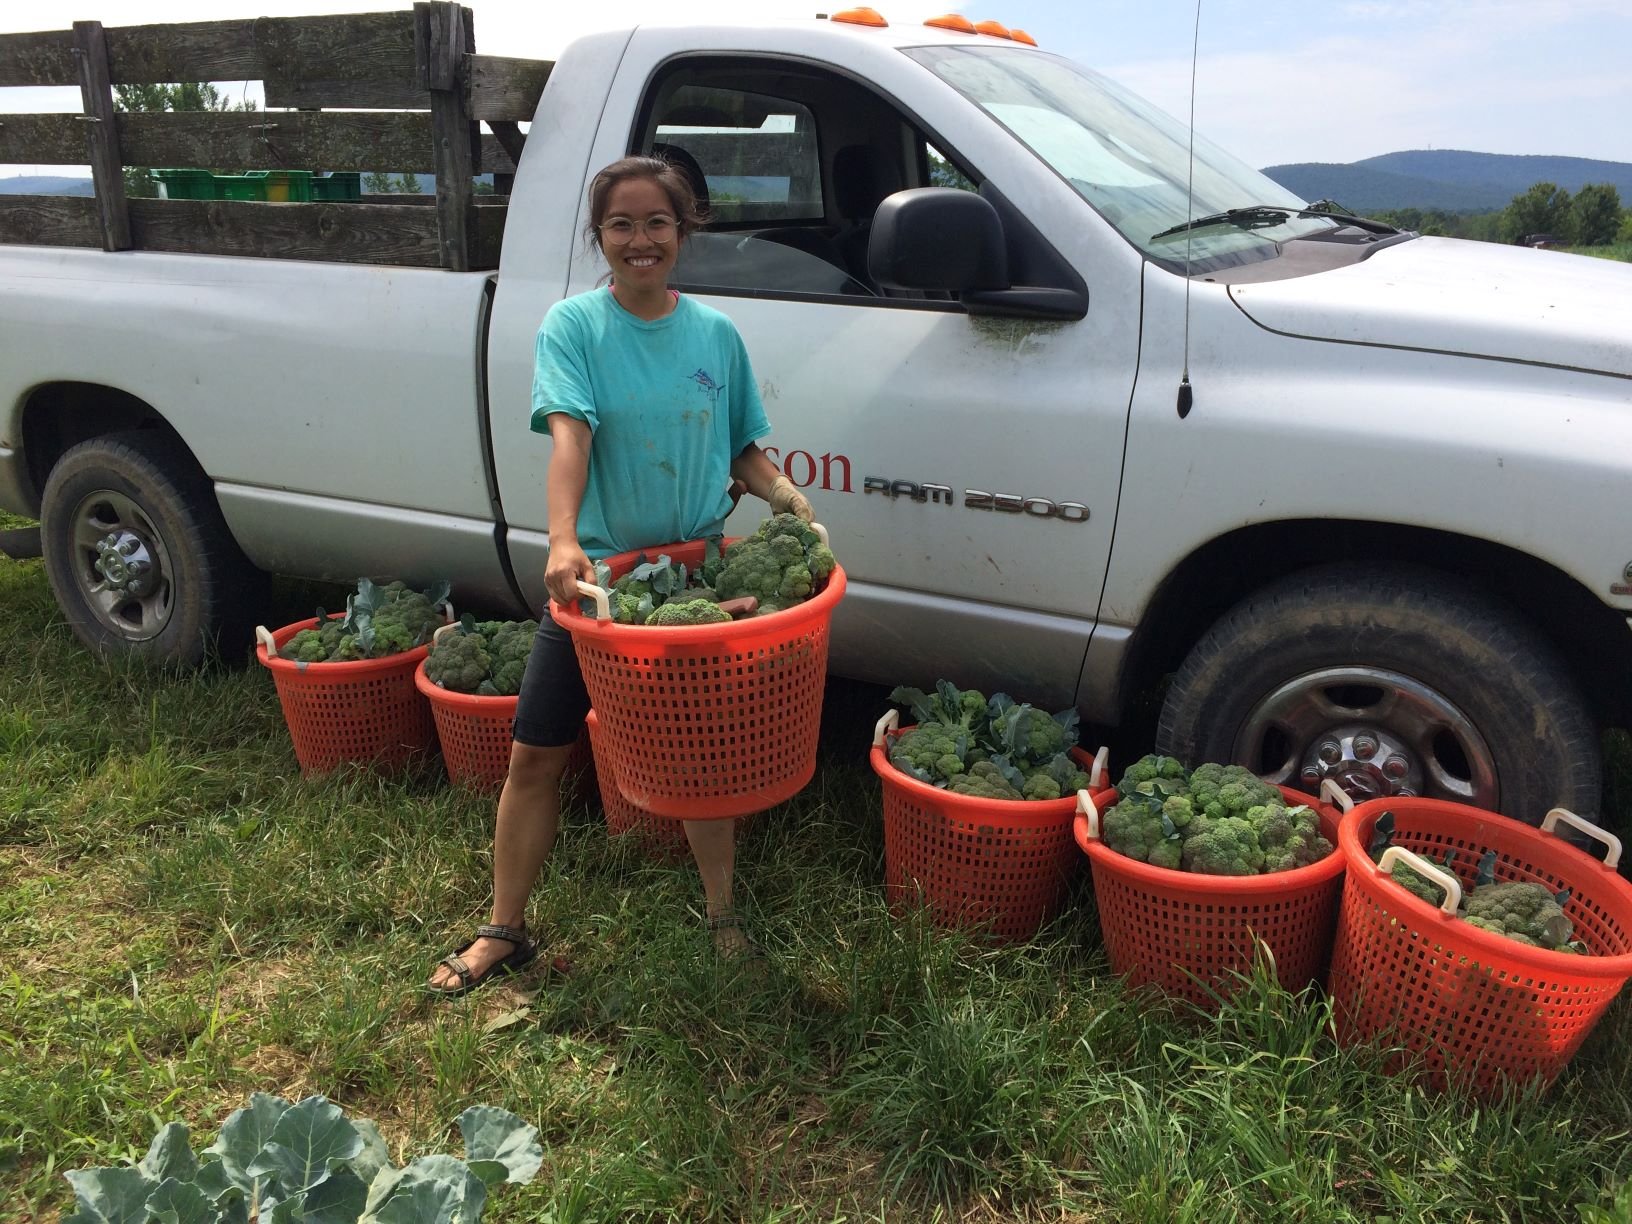 Next Happening: Friday CSA: Dickinson College Farm Field Notes for Week of July 1st